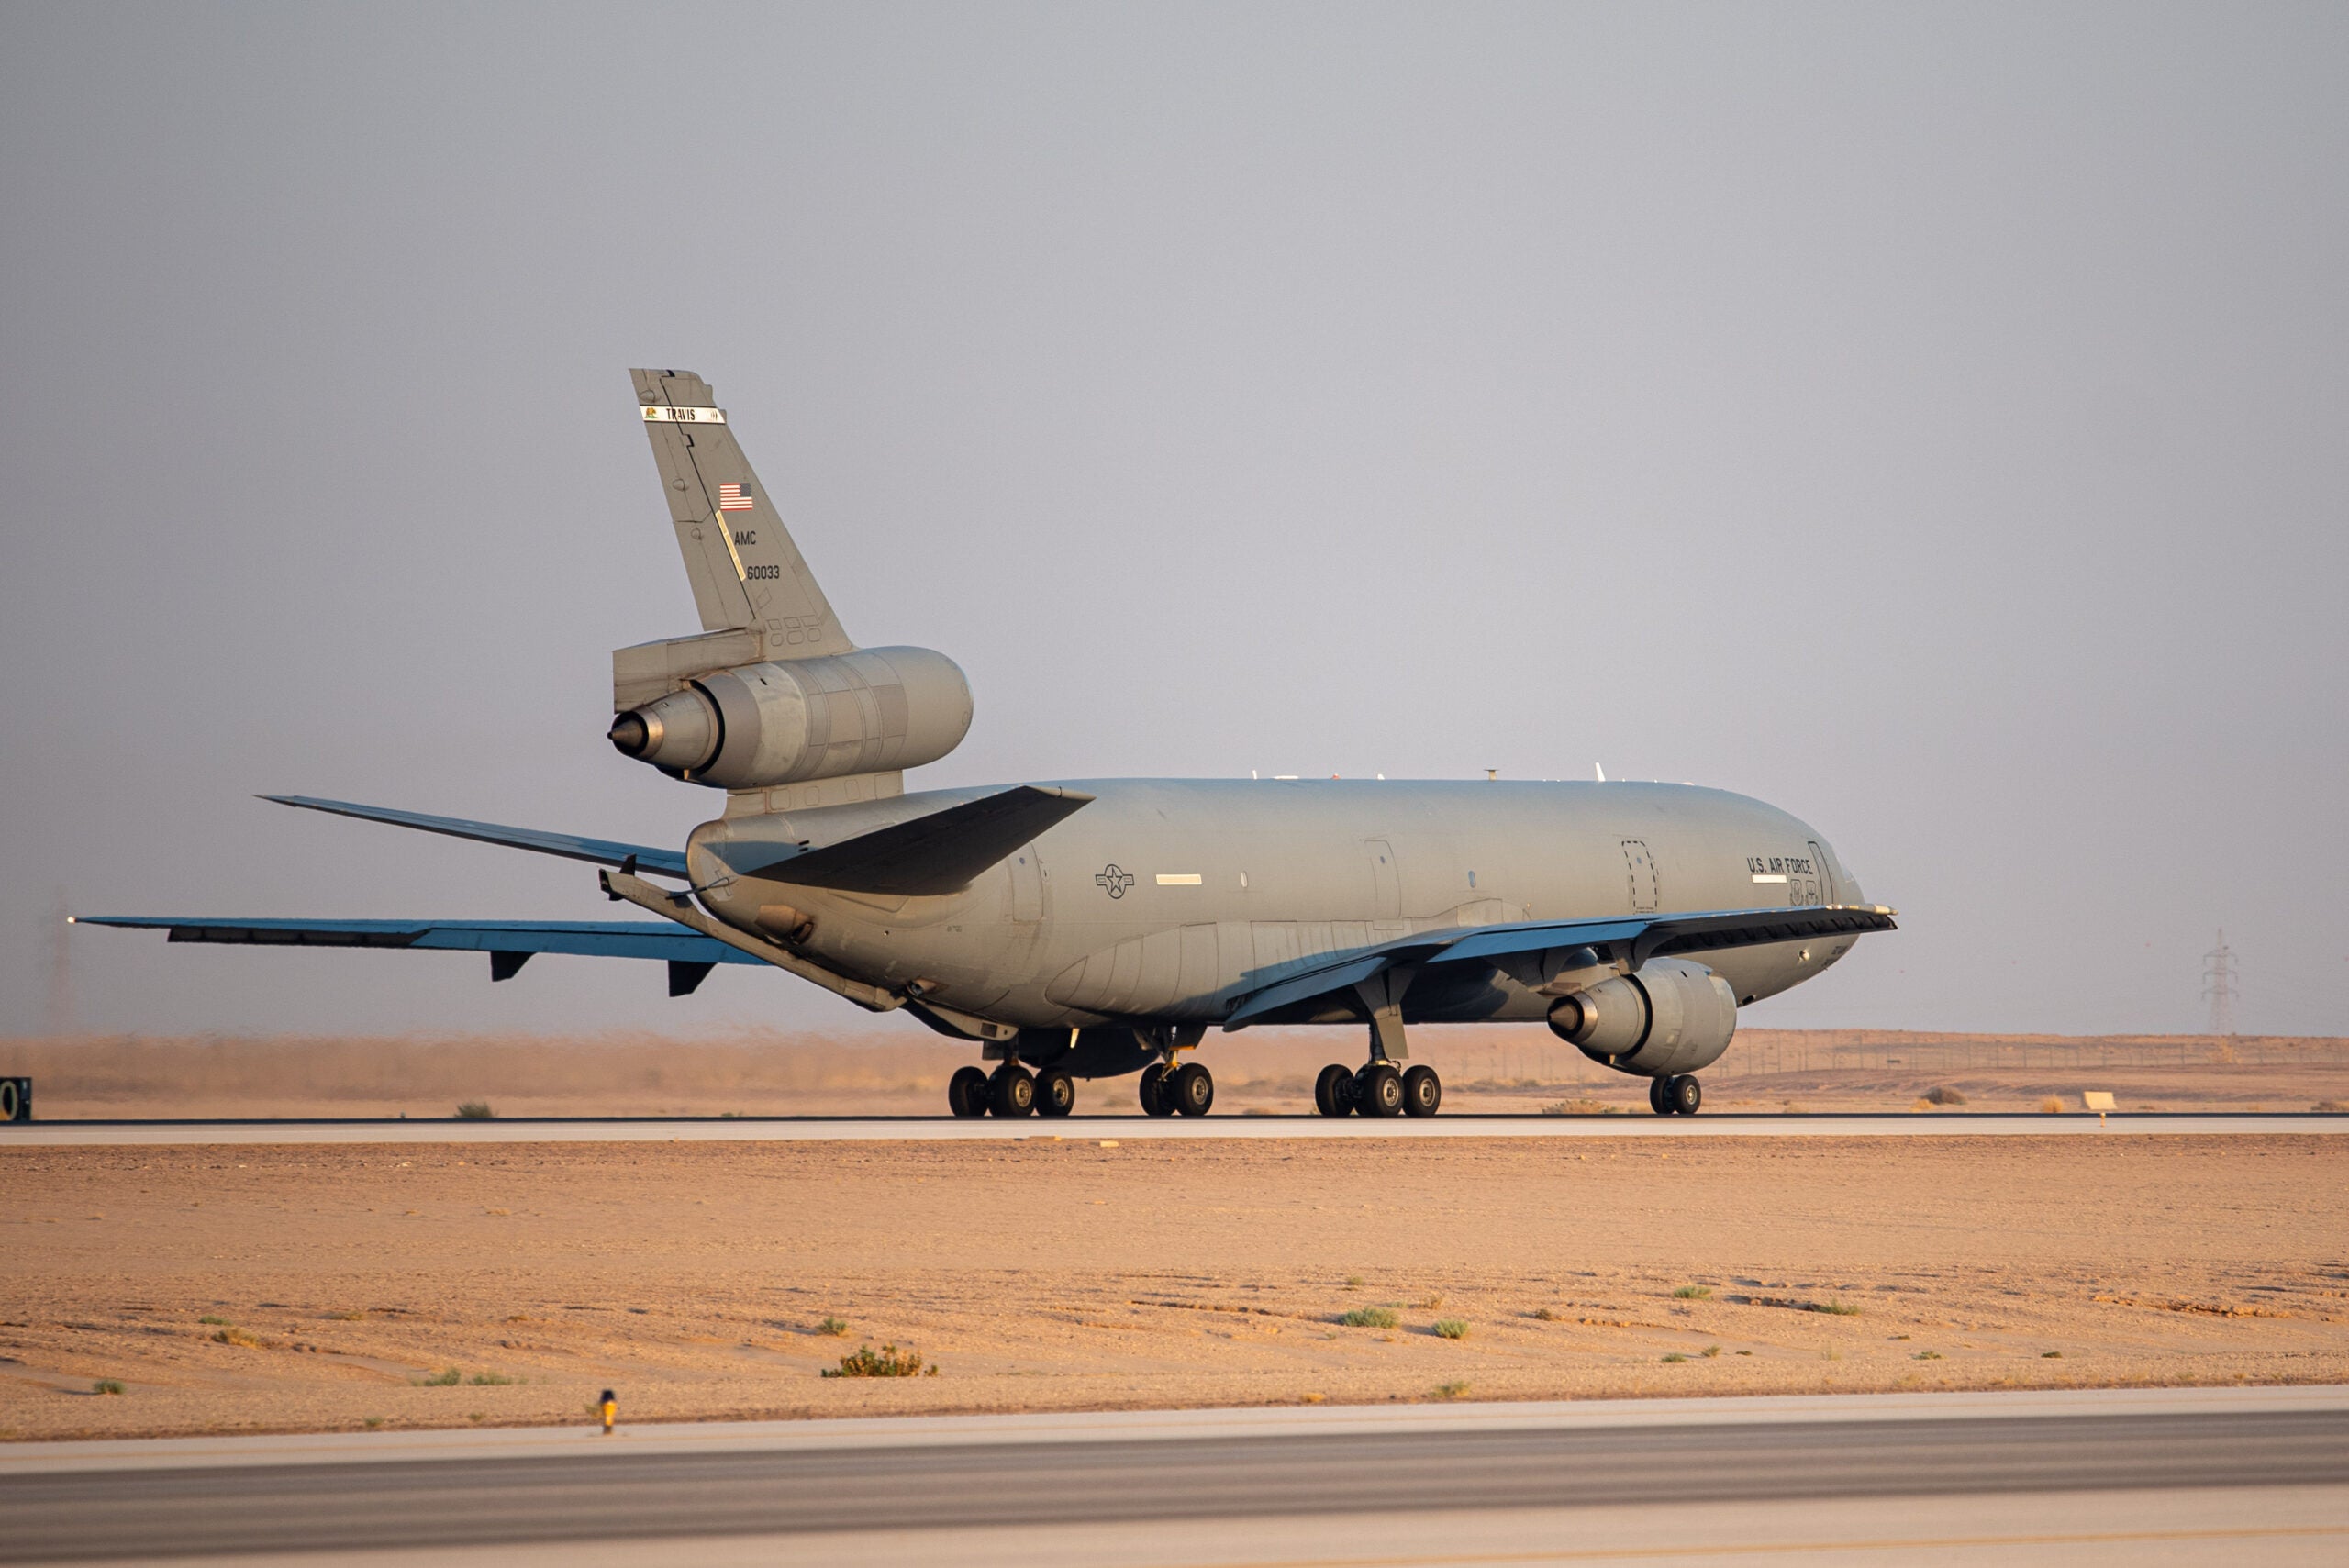 A KC-10 Extender departs after conducting the airframe's final combat deployment at Prince Sultan Air Base (PSAB), Kingdom of Saudi Arabia, Oct. 5, 2023. The departure of the KC-10 at PSAB marked the end of the airframe's over 30 years of service within the U.S. Air Forces Central (AFCENT) Area of Responsibility. By September 2024, the U.S. Air Force's fleet of KC-10s will be decommissioned and gradually replaced by the KC-46 aircraft. (U.S. Air Force photo by Tech. Sgt. Alexander Frank)